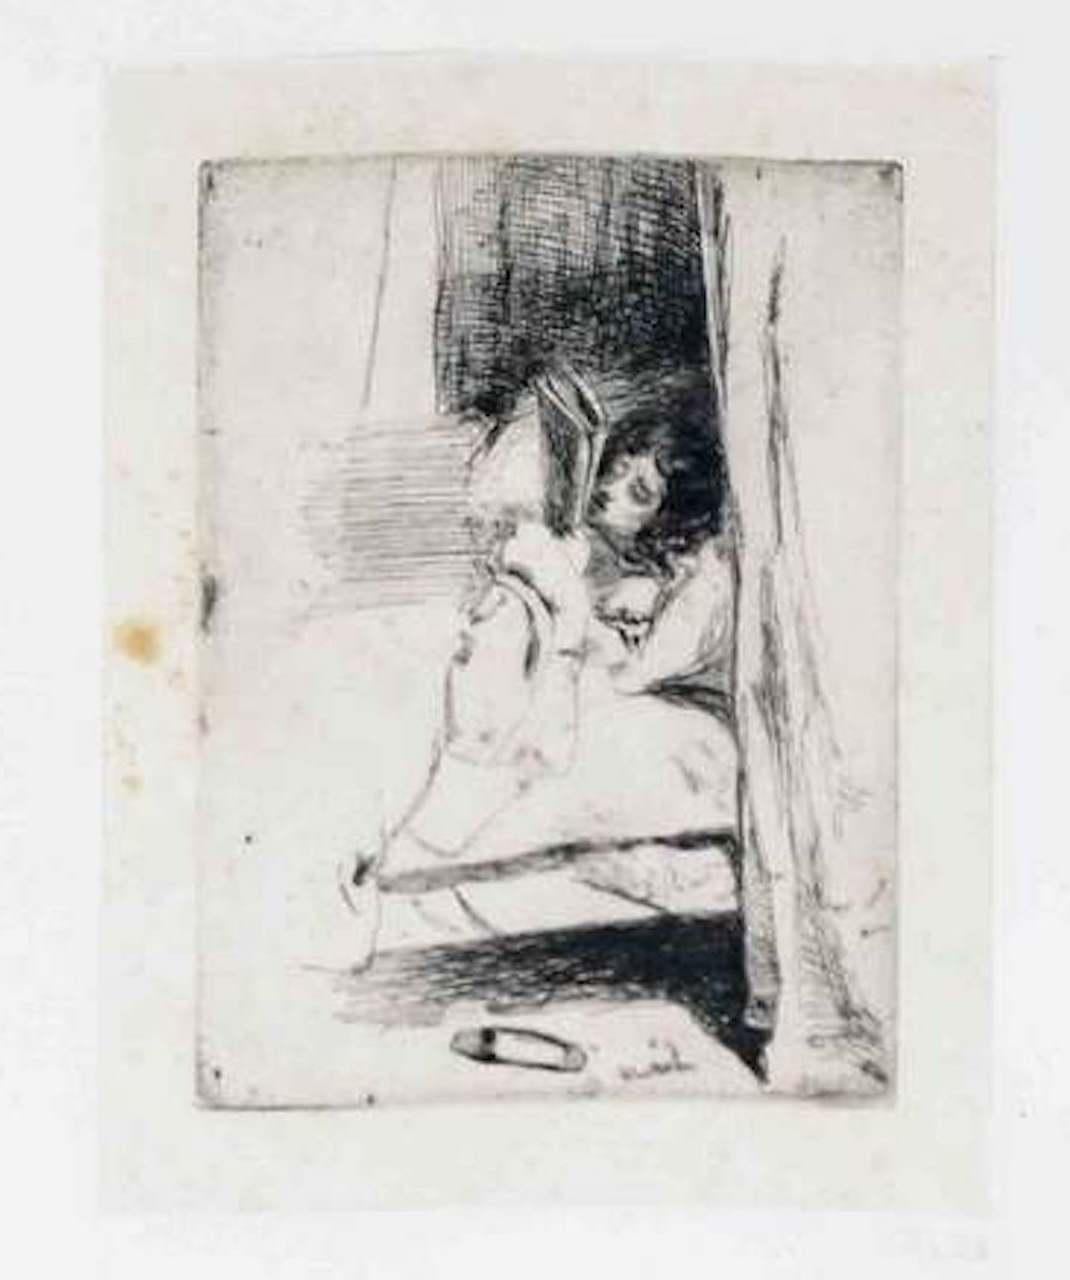 James Abbott McNeill Whistler Figurative Print - Reading in Bed - Original Etching by J.A.M. Whistler - 1858